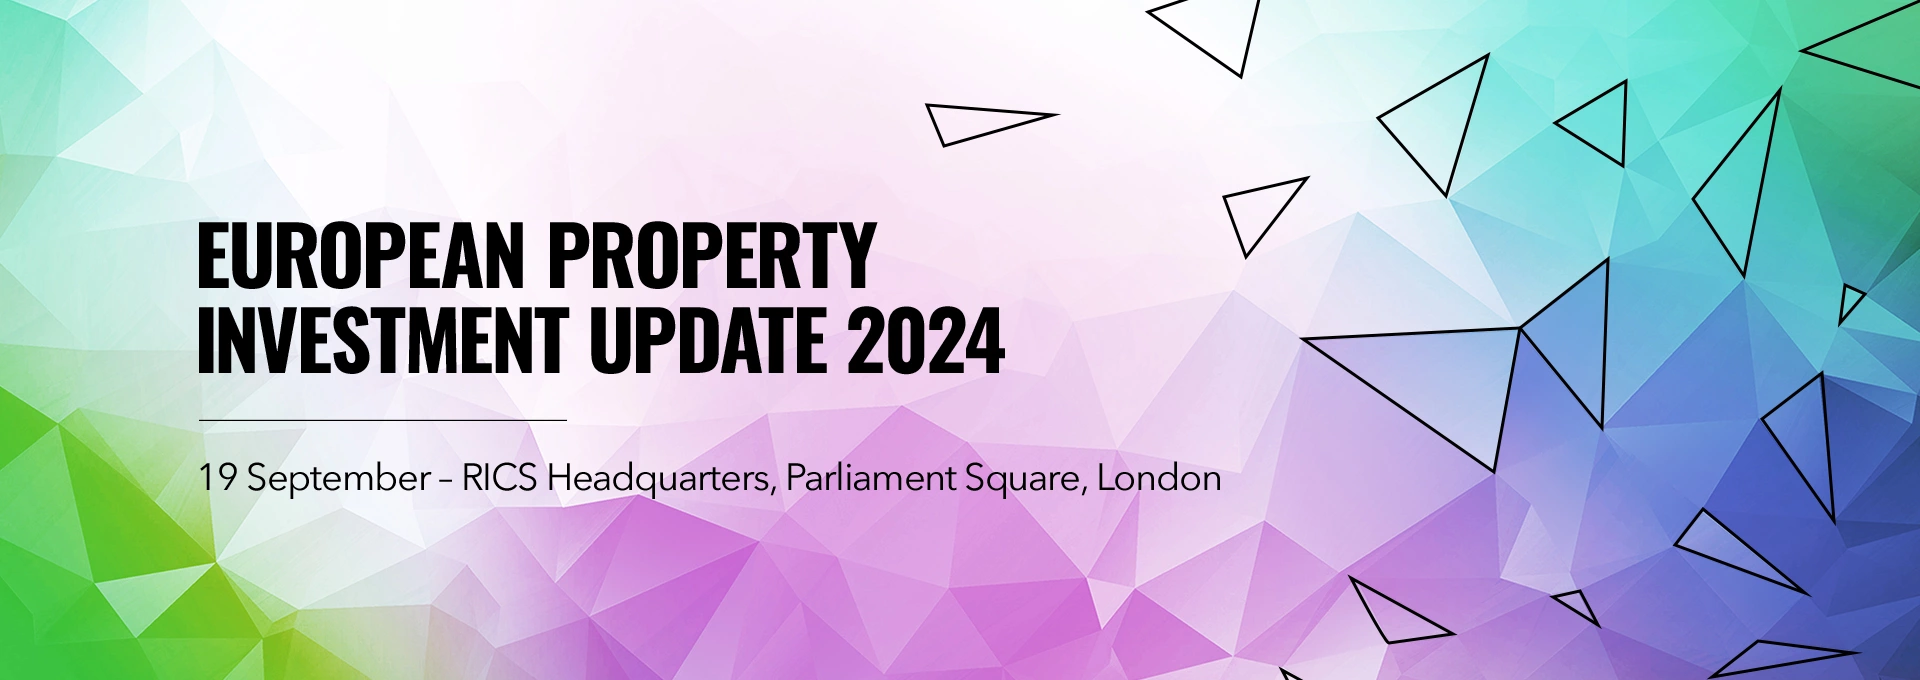 European Property Investment Update 2024 - London